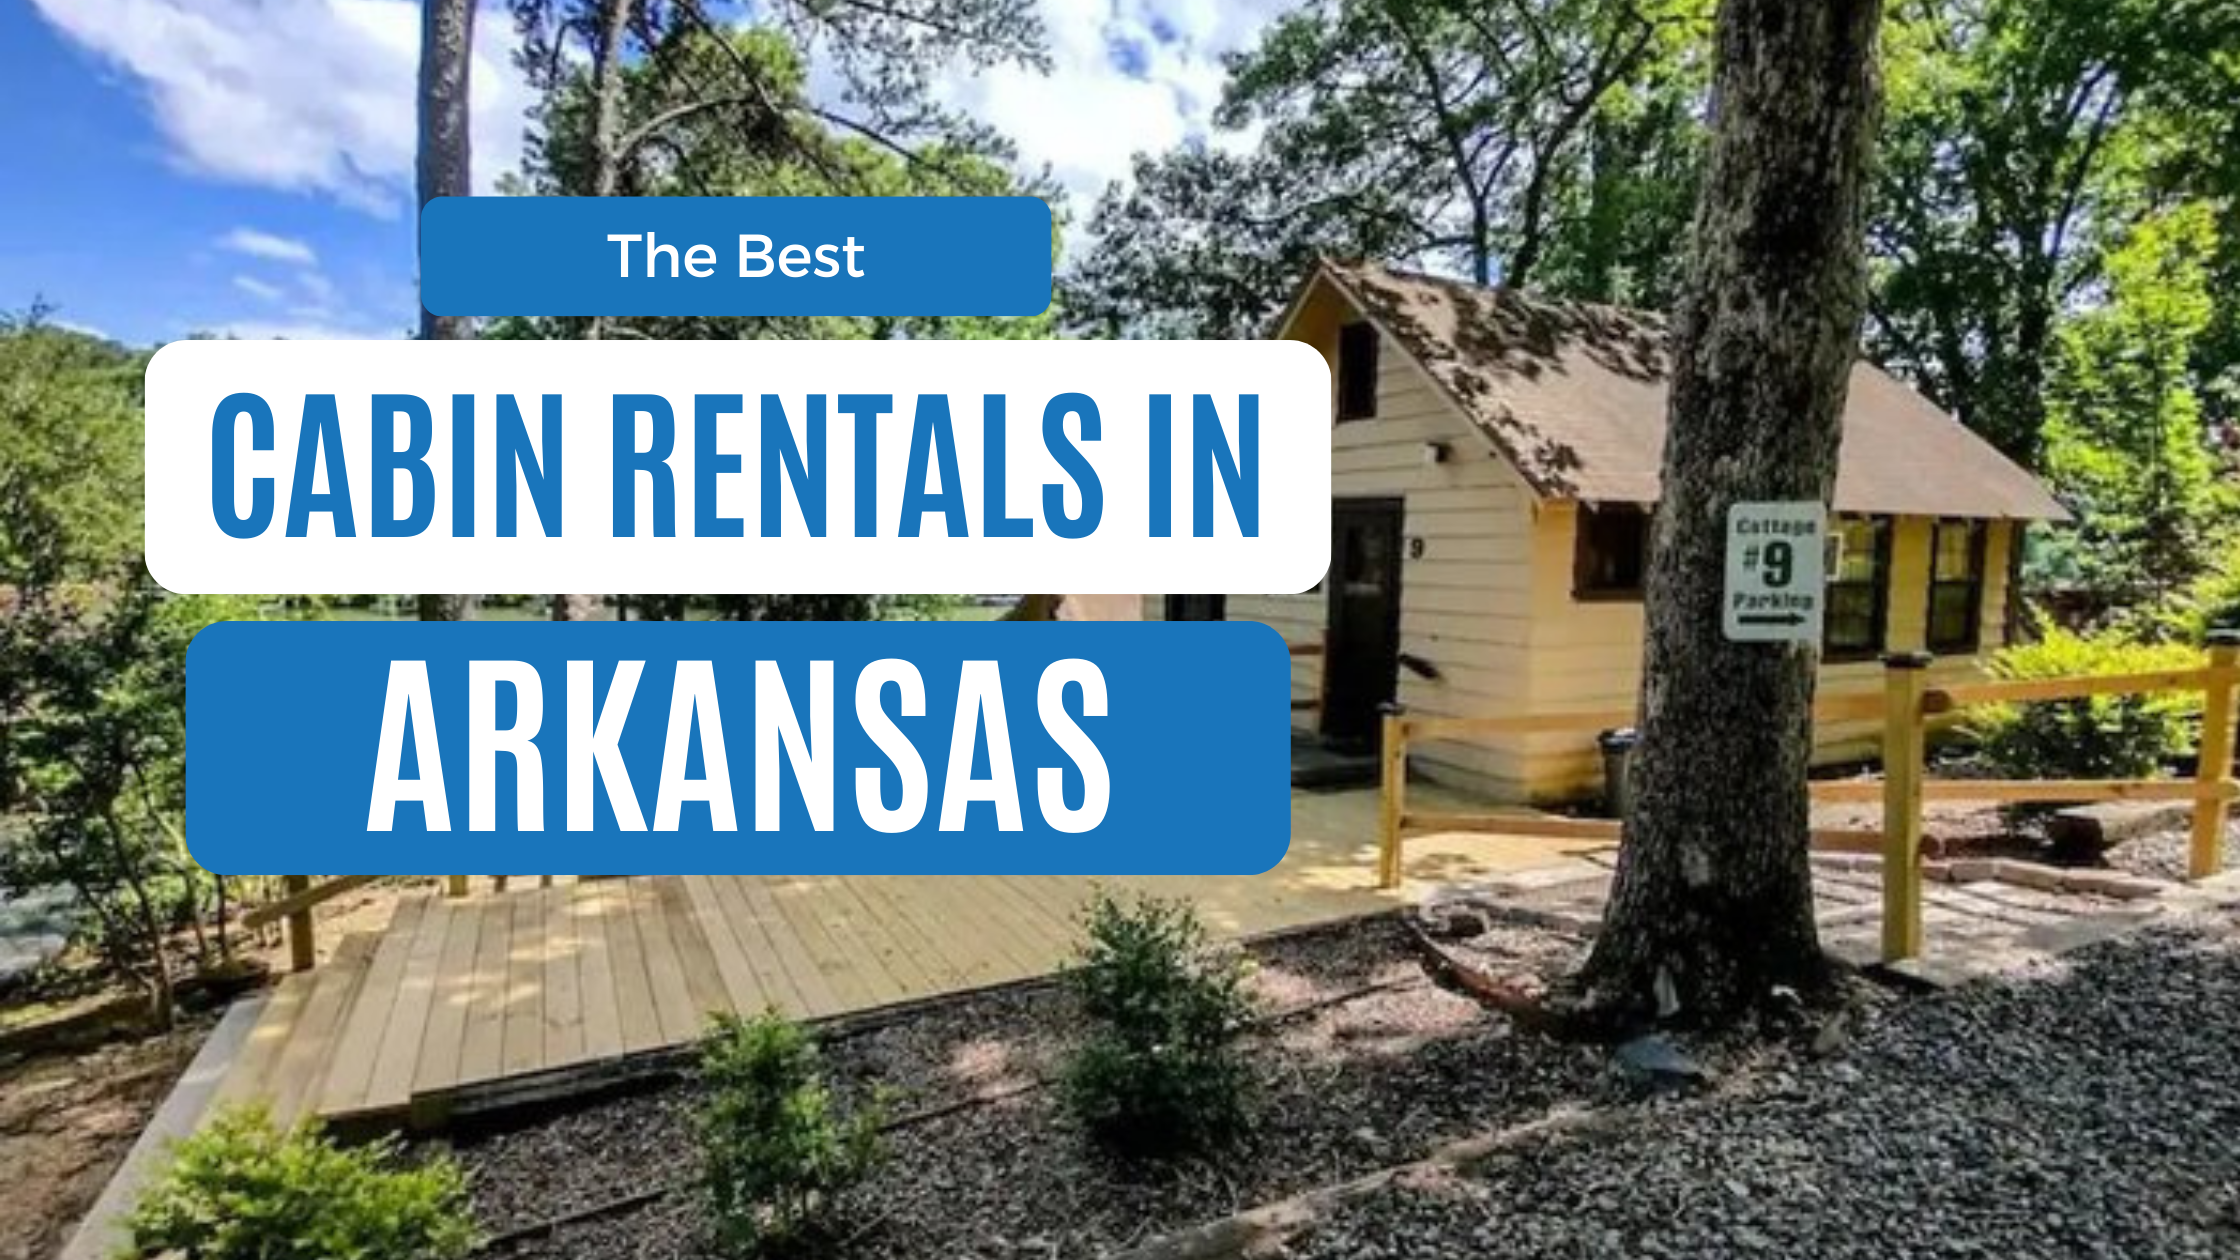 Best Cabins in Arkansas: 12 Cozy Rentals for Every Budget